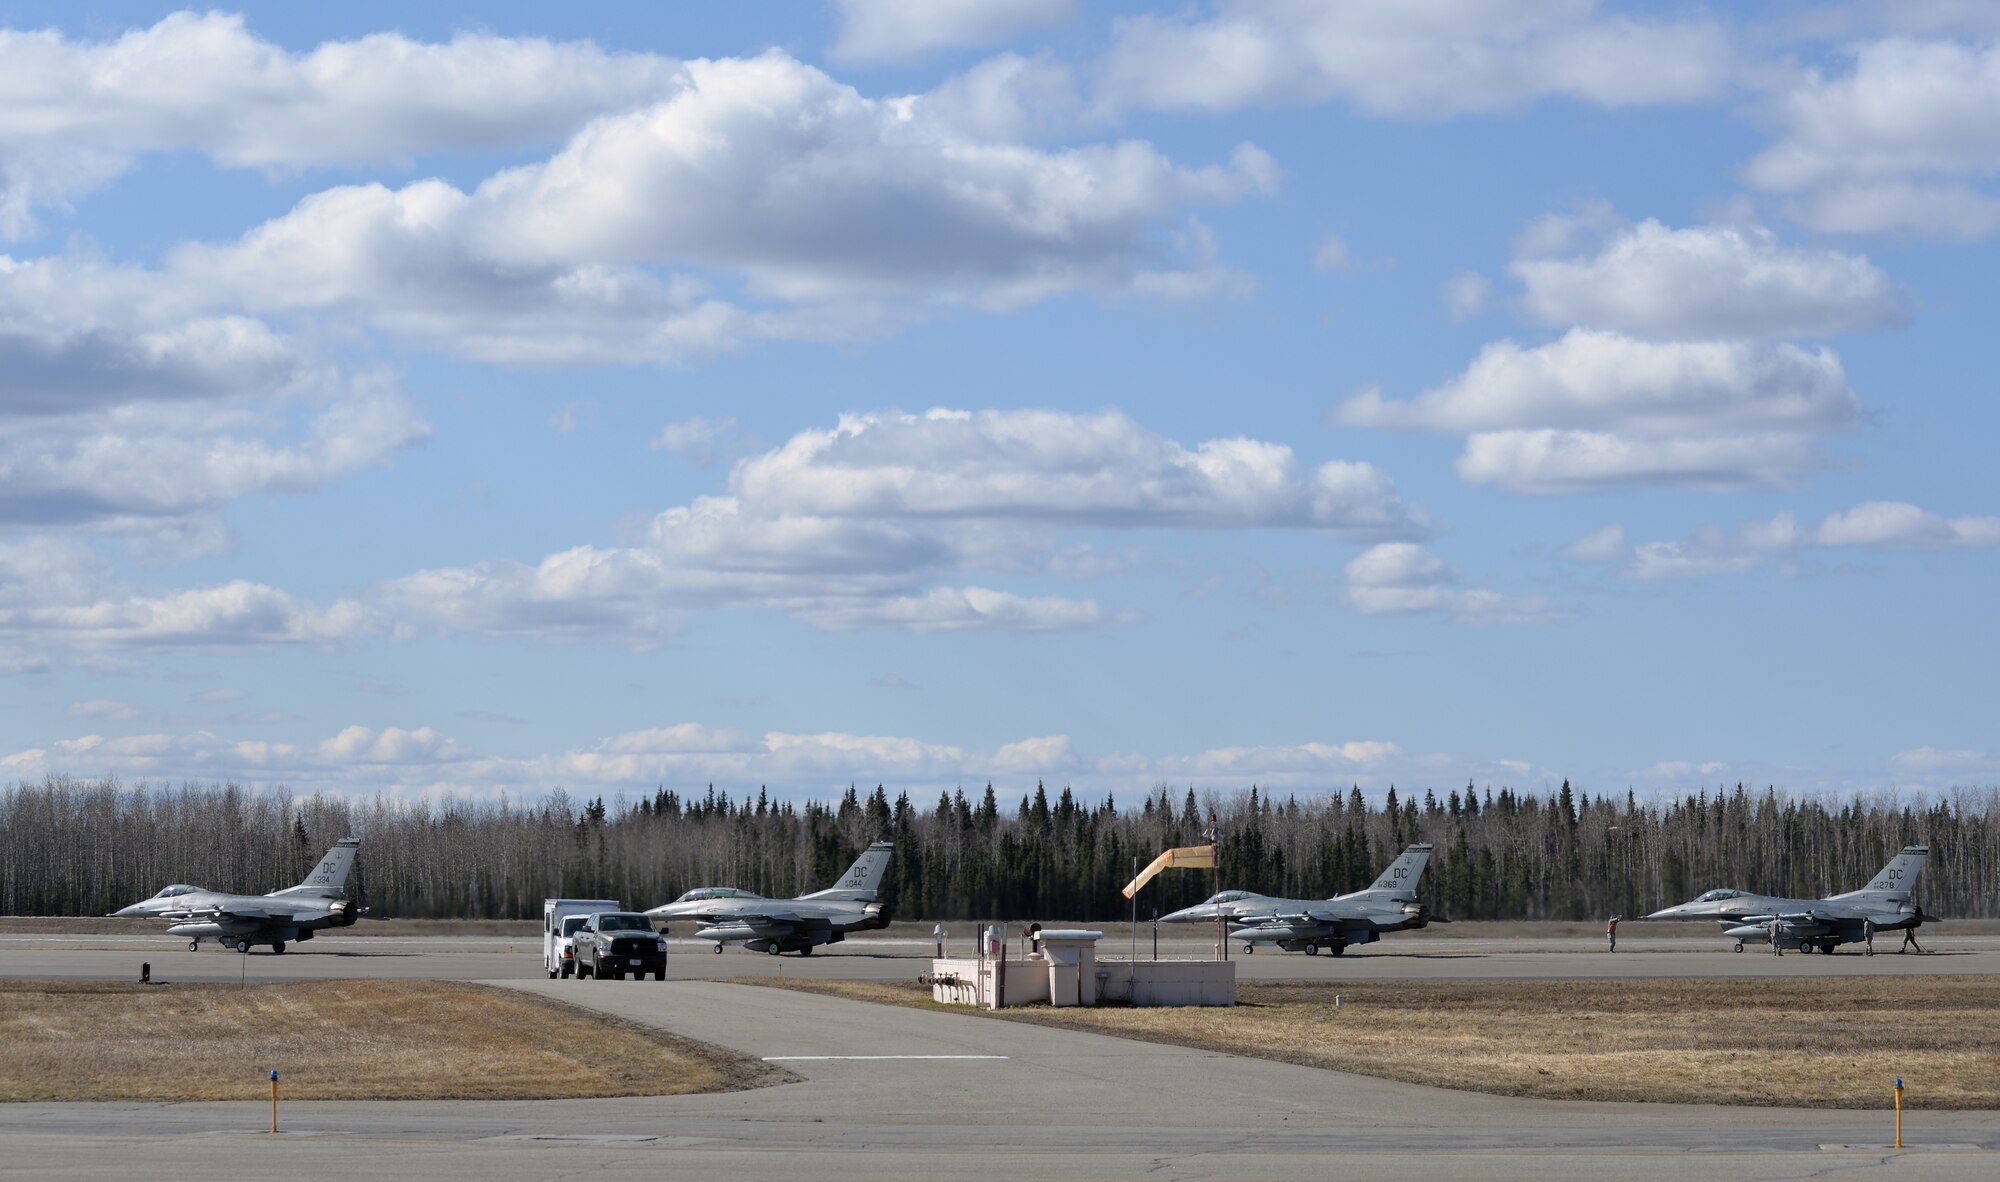 U.S. Air Force F-16 Fighting Falcon aircraft assigned to the 113th Wing, District of Columbia Air National Guard, wait to take off from Eielson Air Force Base, Alaska, April 27, 2015, to participate in a Distant Frontier mission with F-16 pilots and aircraft assigned to Eielson's 18th Aggressor Squadron. Distant Frontier provided the deployed pilots an opportunity to fly orientation flights in the more than 67,000 square-mile Joint Pacific Alaska Range Complex, become familiar with local flying restrictions, receive local safety and survival briefings, and develop orientation plans during the week prior to RED FLAG-Alaska 15-2, a Pacific Air Forces-directed field training exercise flown under simulated air combat conditions to increases combat capability. (U.S. Air Force photo by Master Sgt. Karen J. Tomasik/Released)